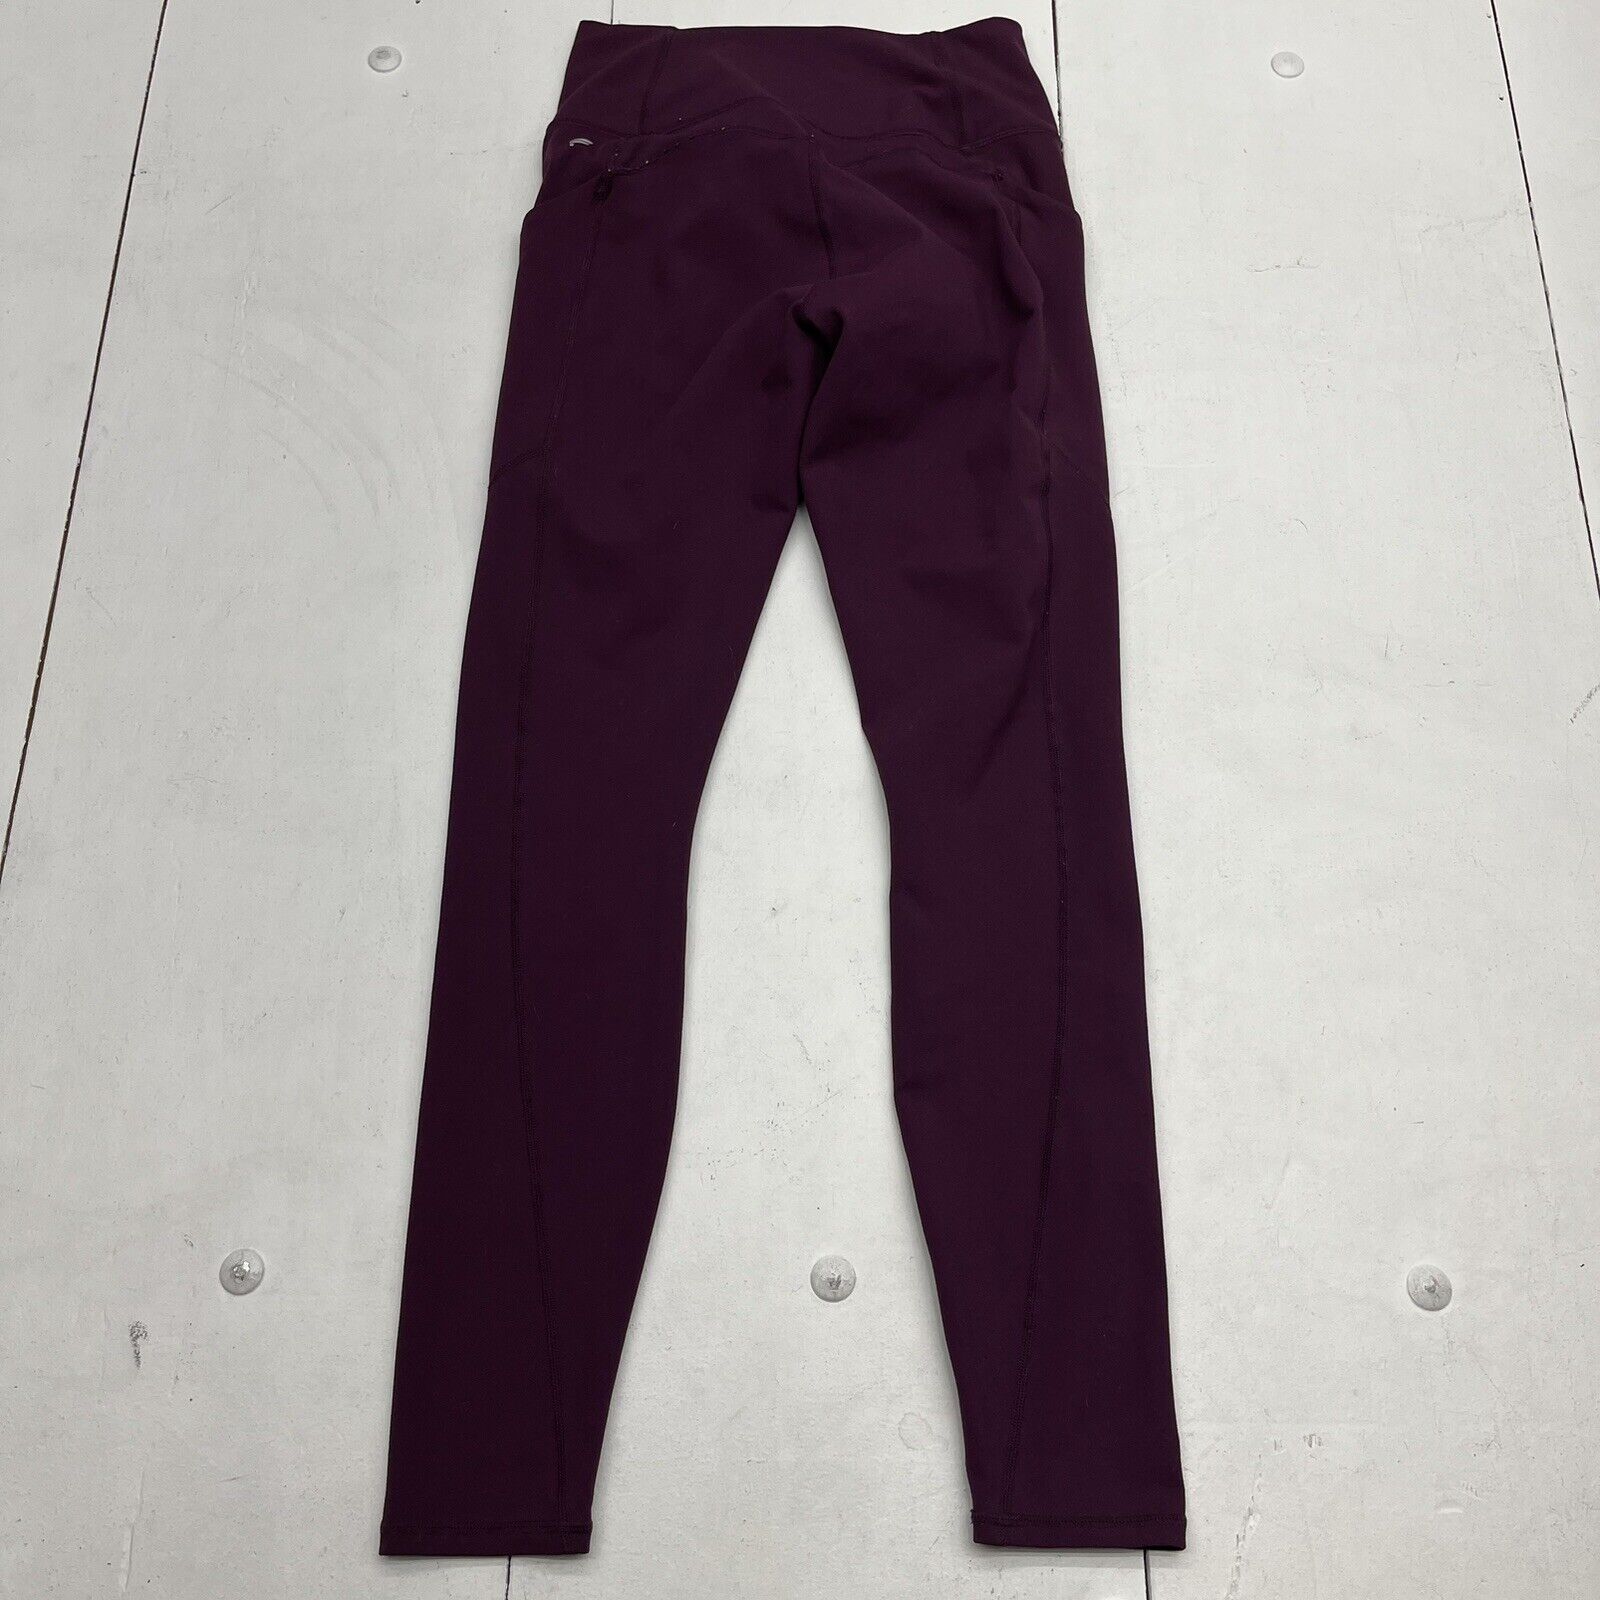 Fabletics Pureluxe Purple Oasis High Waisted 7/8 Leggings W